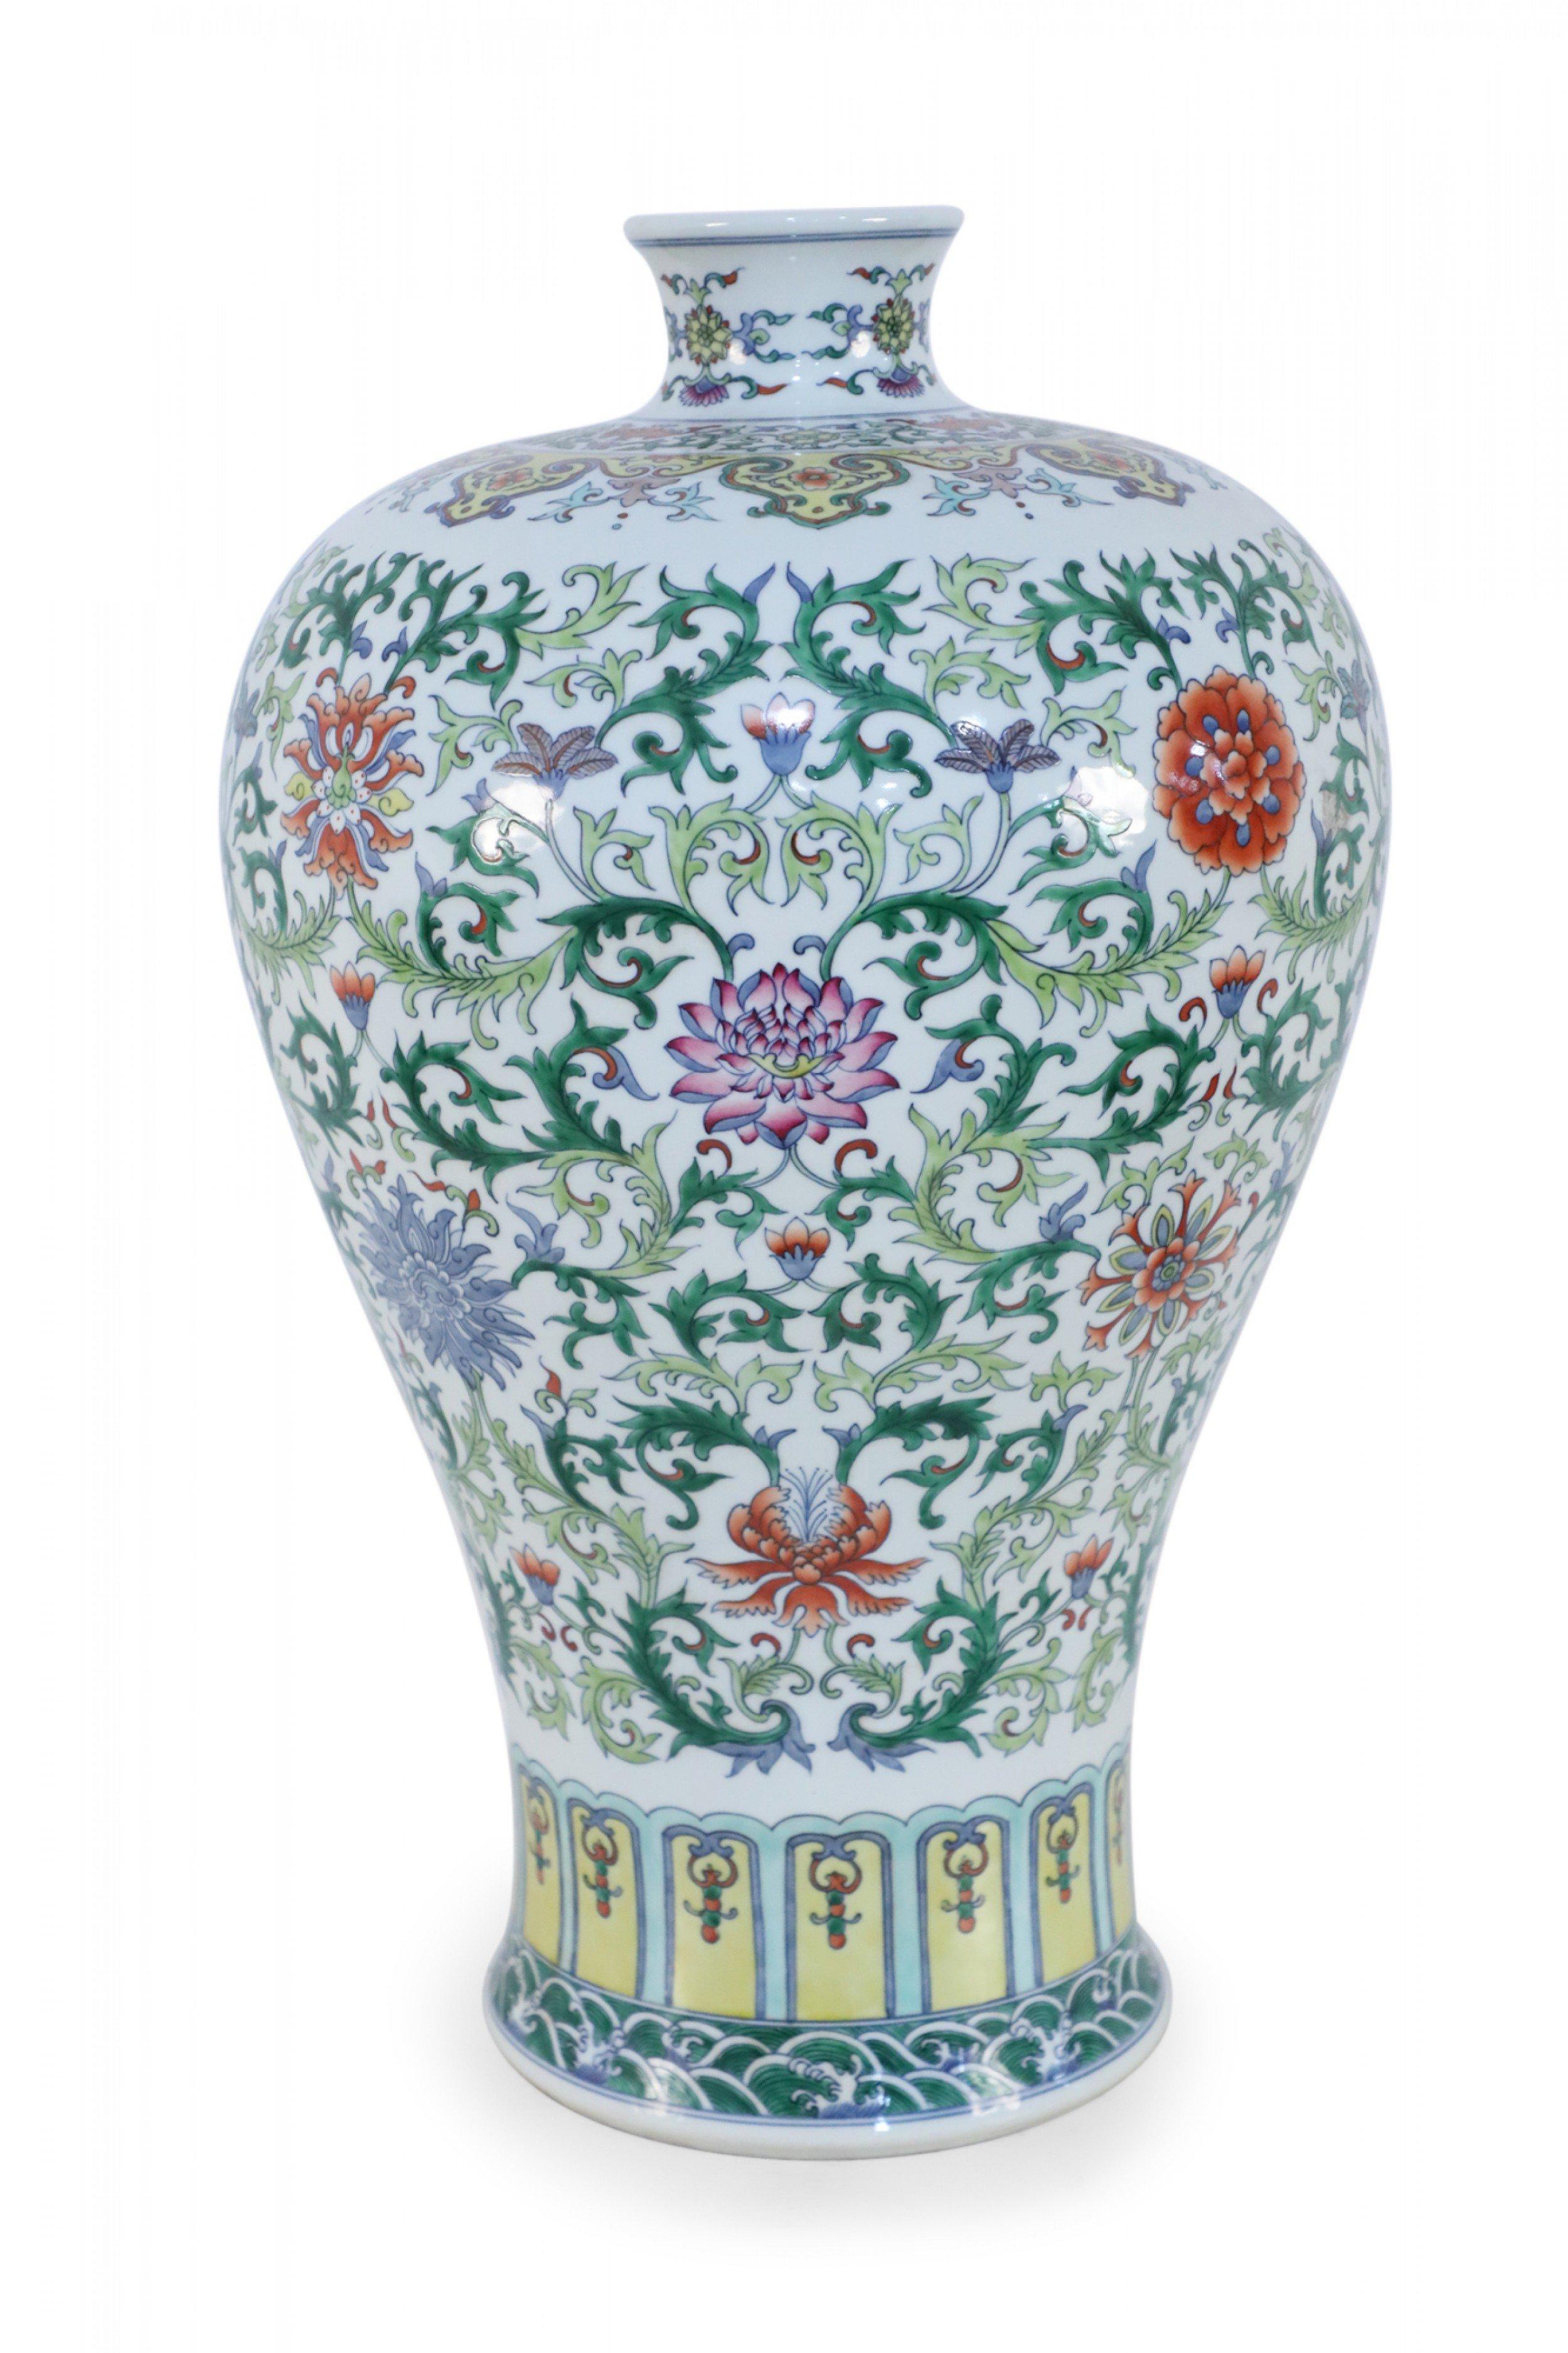 20th Century Chinese White and Multicolor Floral and Vine Motif Meiping Porcelain Urn